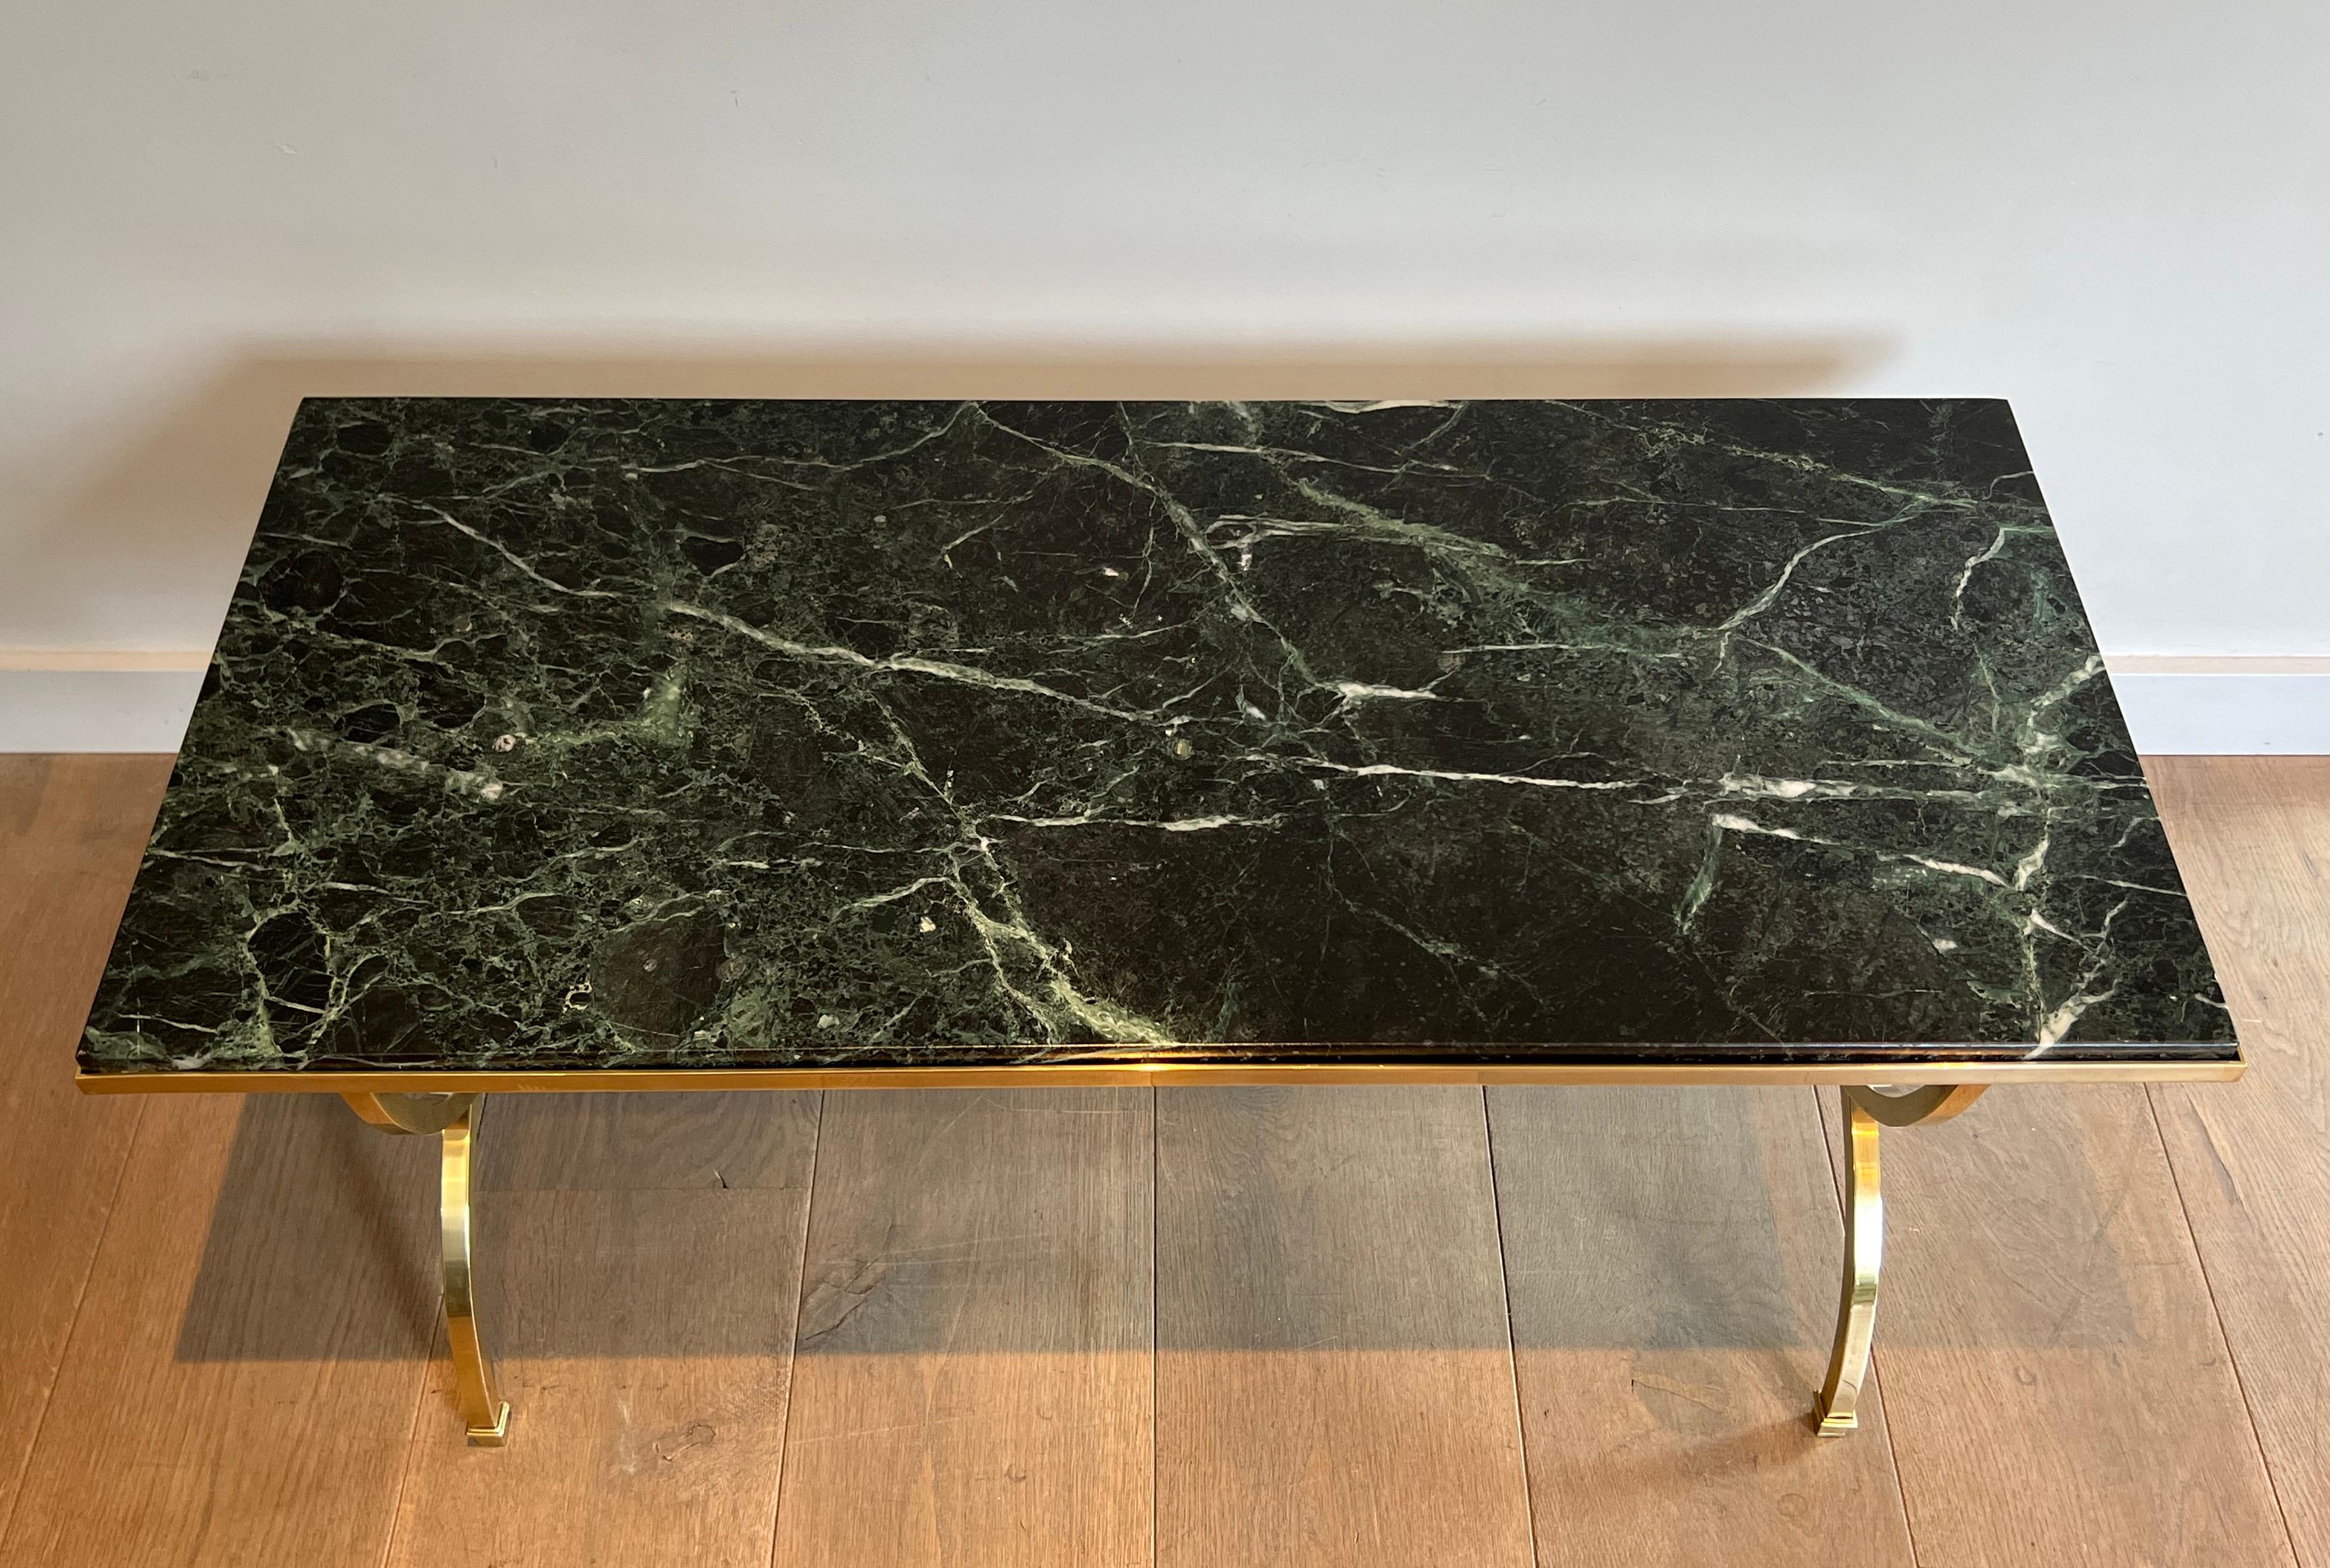 This very nice and elegant neoclassical style coffee table is made of a hoop brass base with a green marble on top. This is a French work by famous designer Maison Jansen. Circa 1940